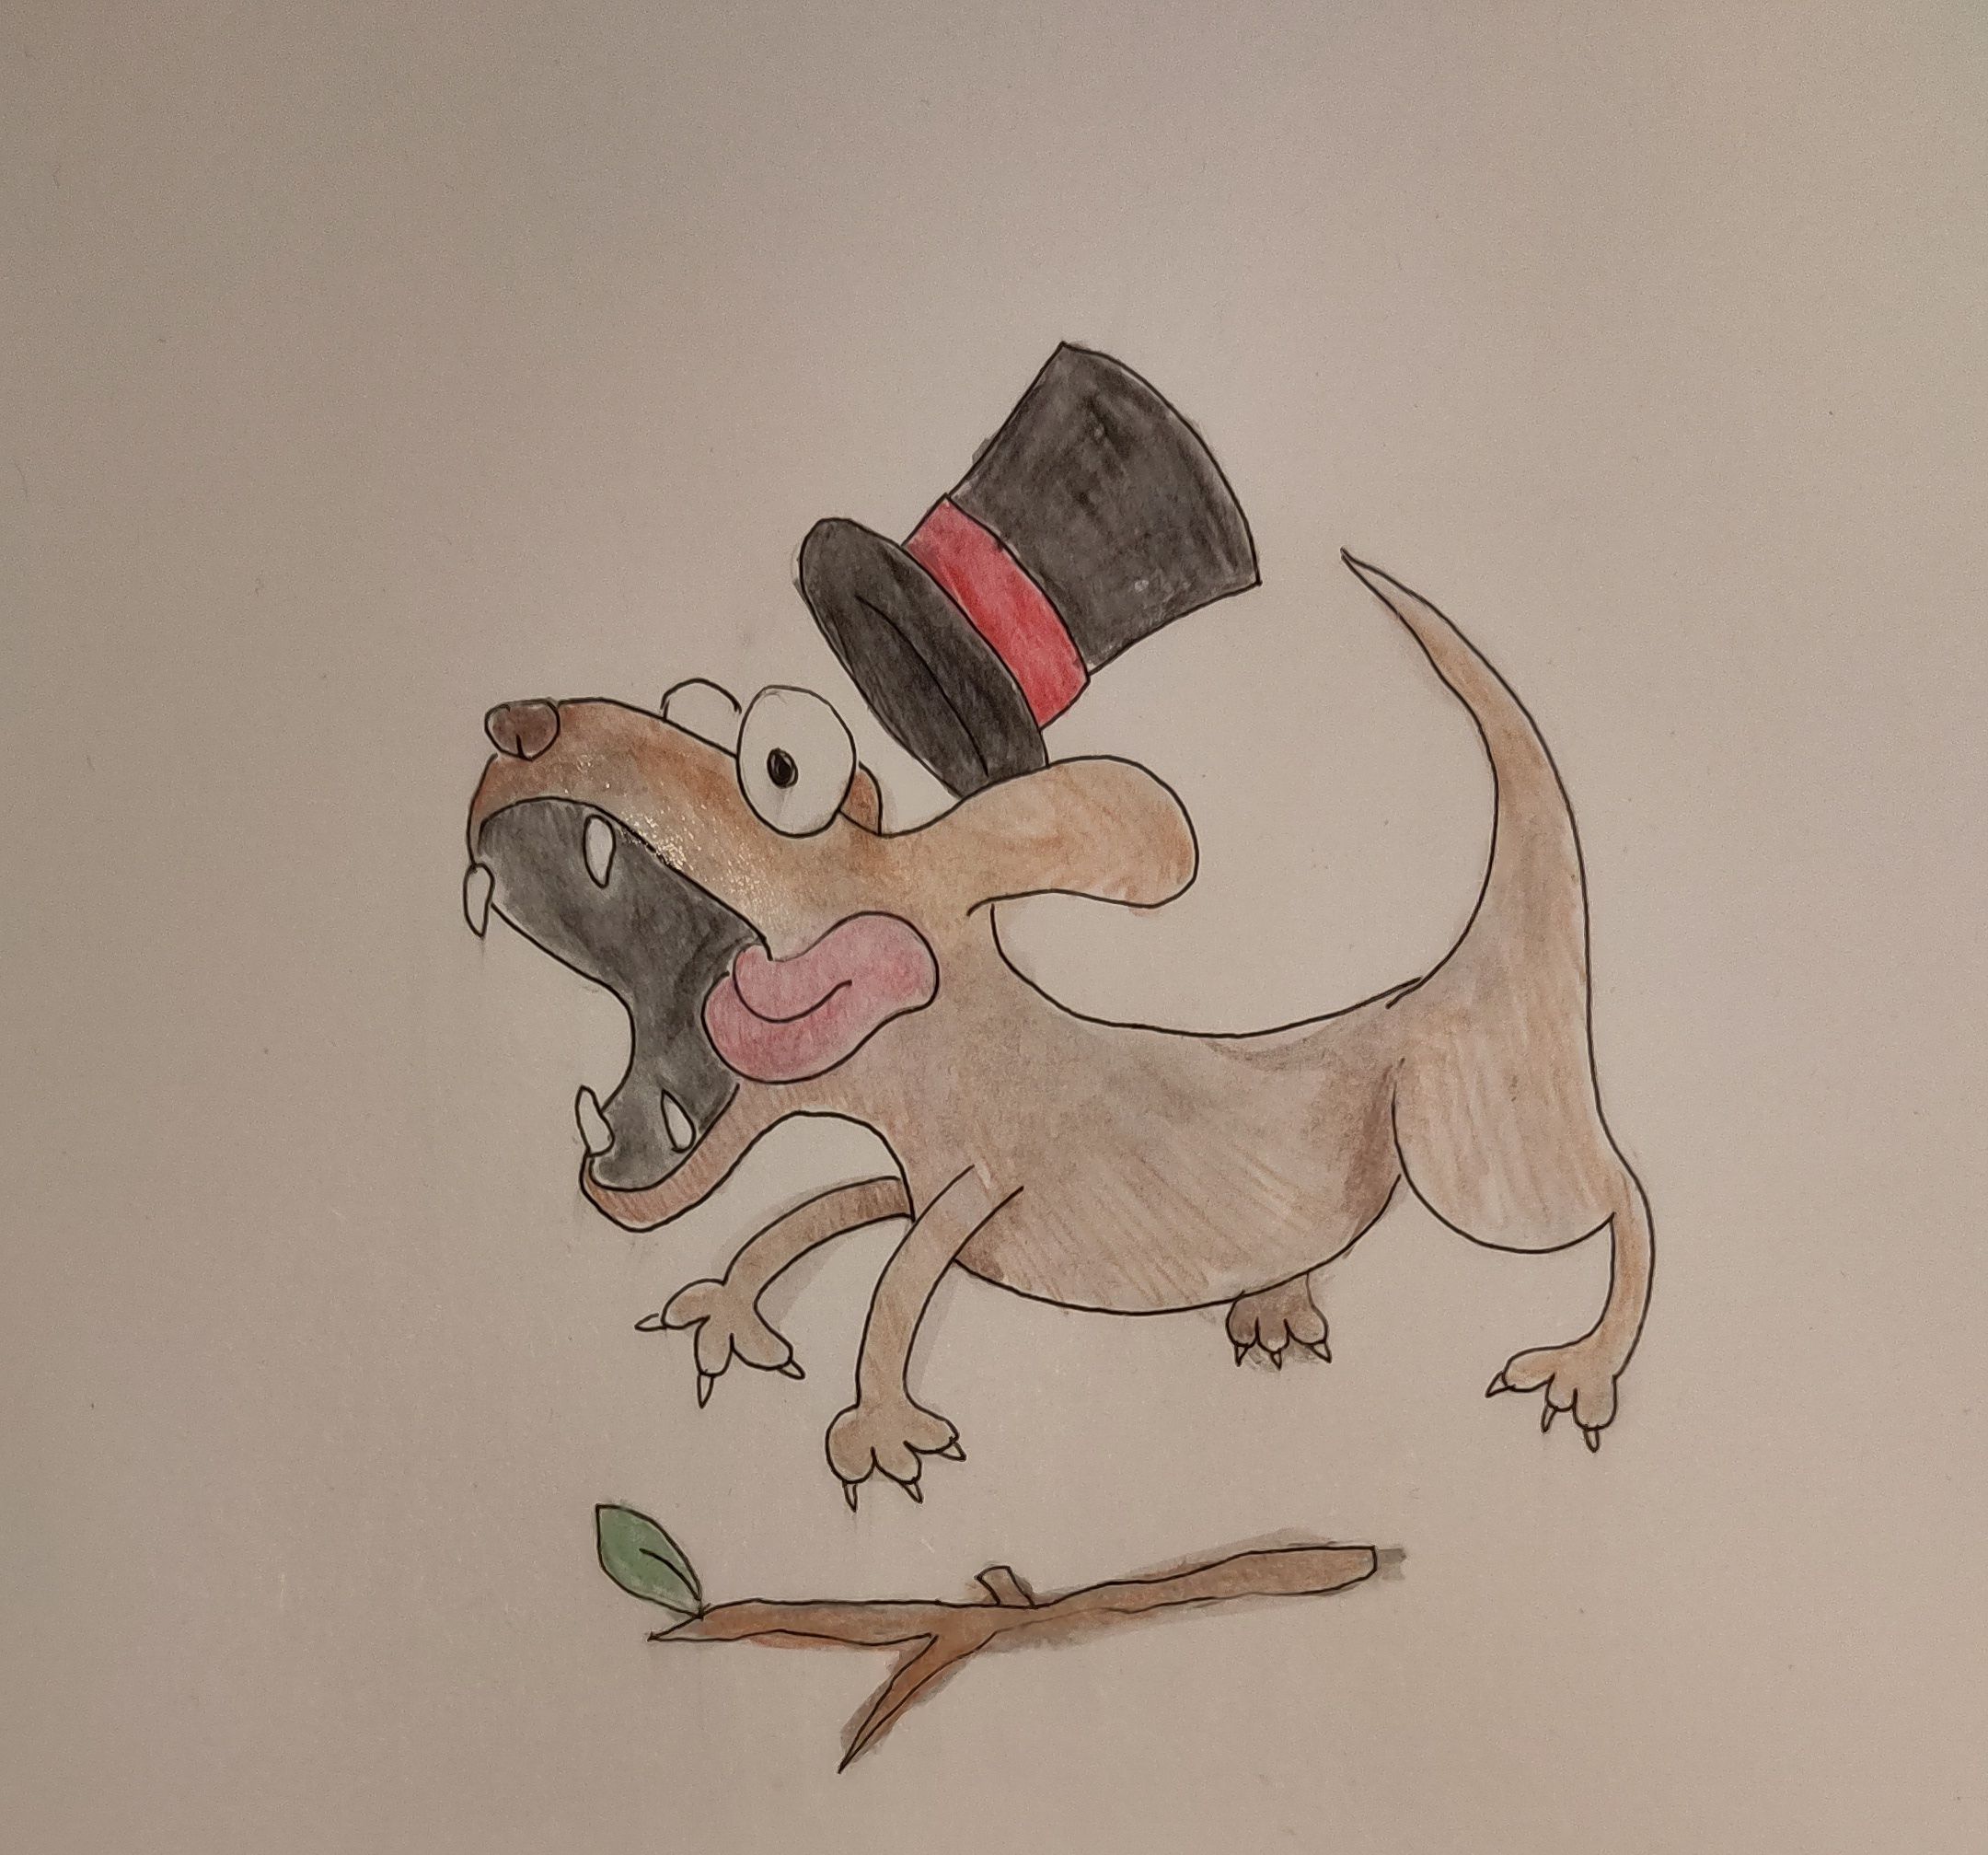 Dog wearing a top hat struggling over a stick